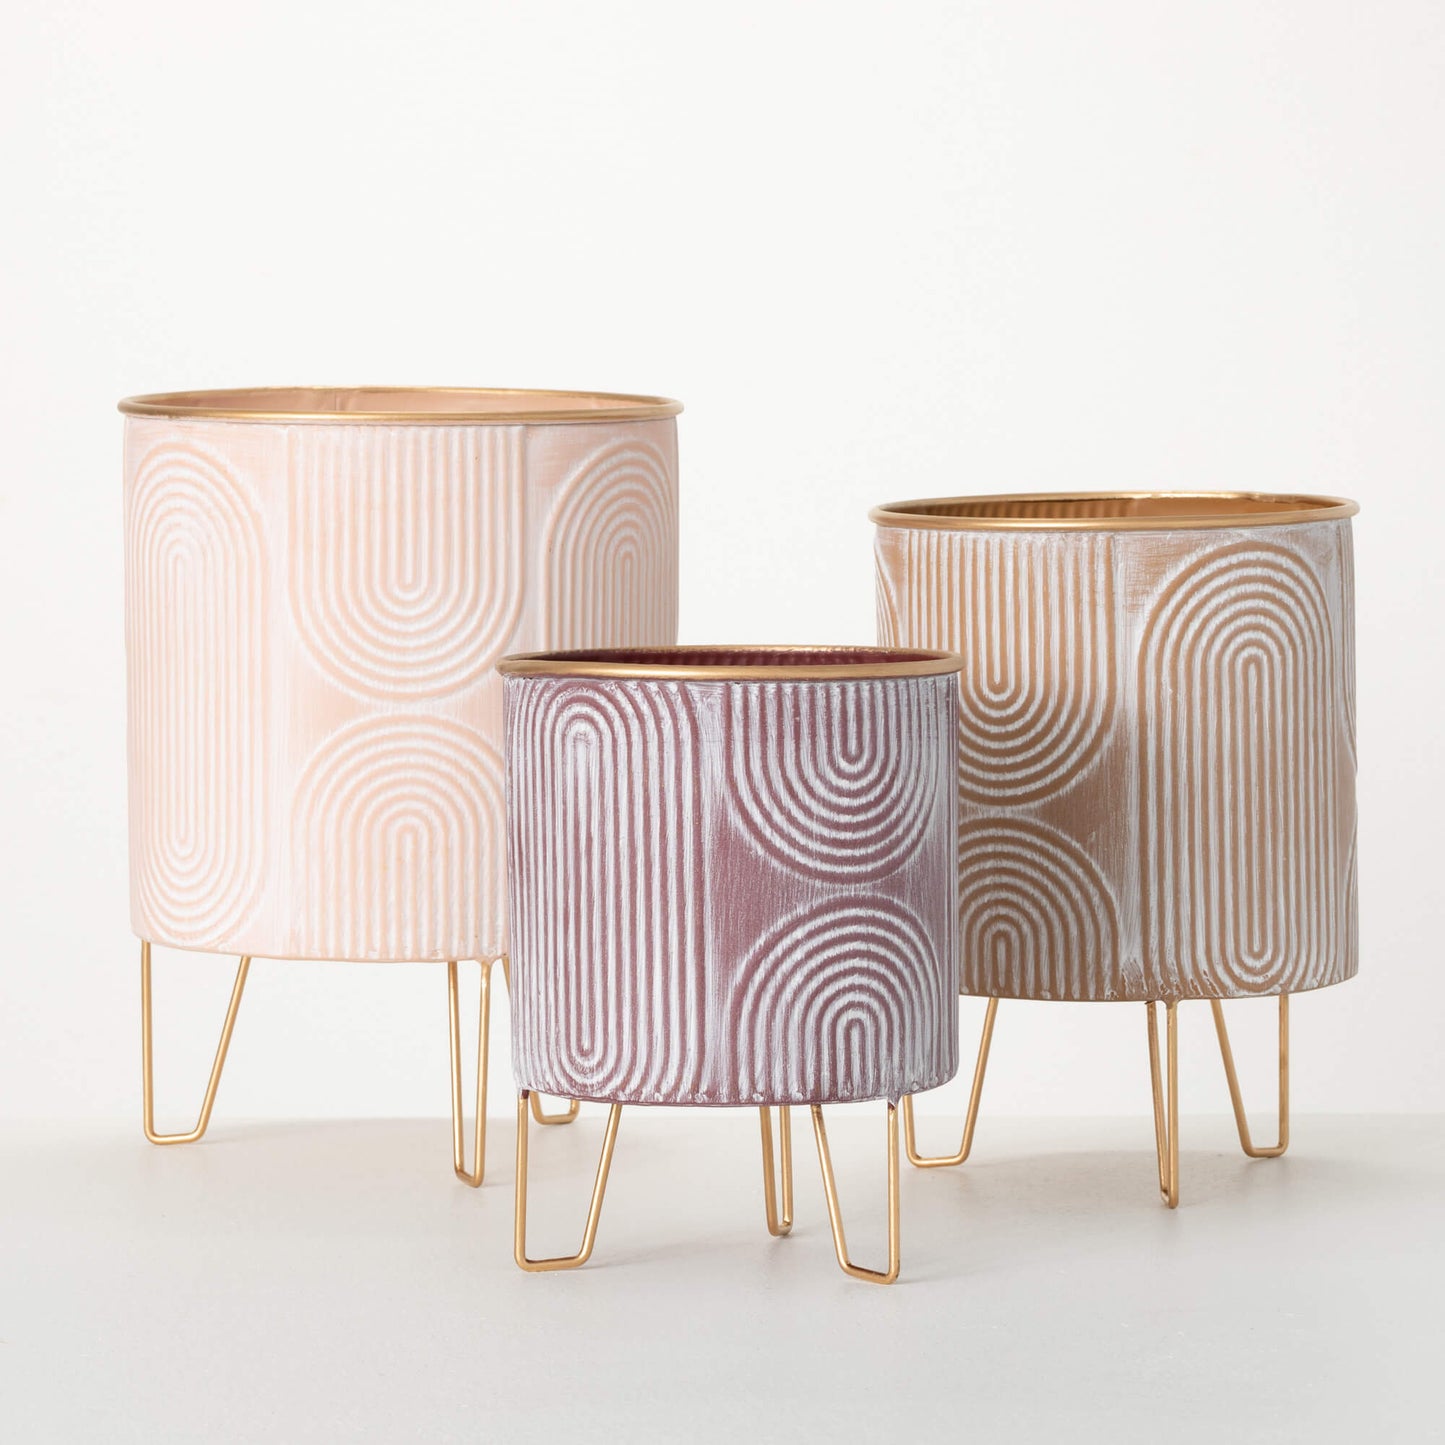 round metal planter with blush hues, retro geometric patterns, and gold hairpin legs.